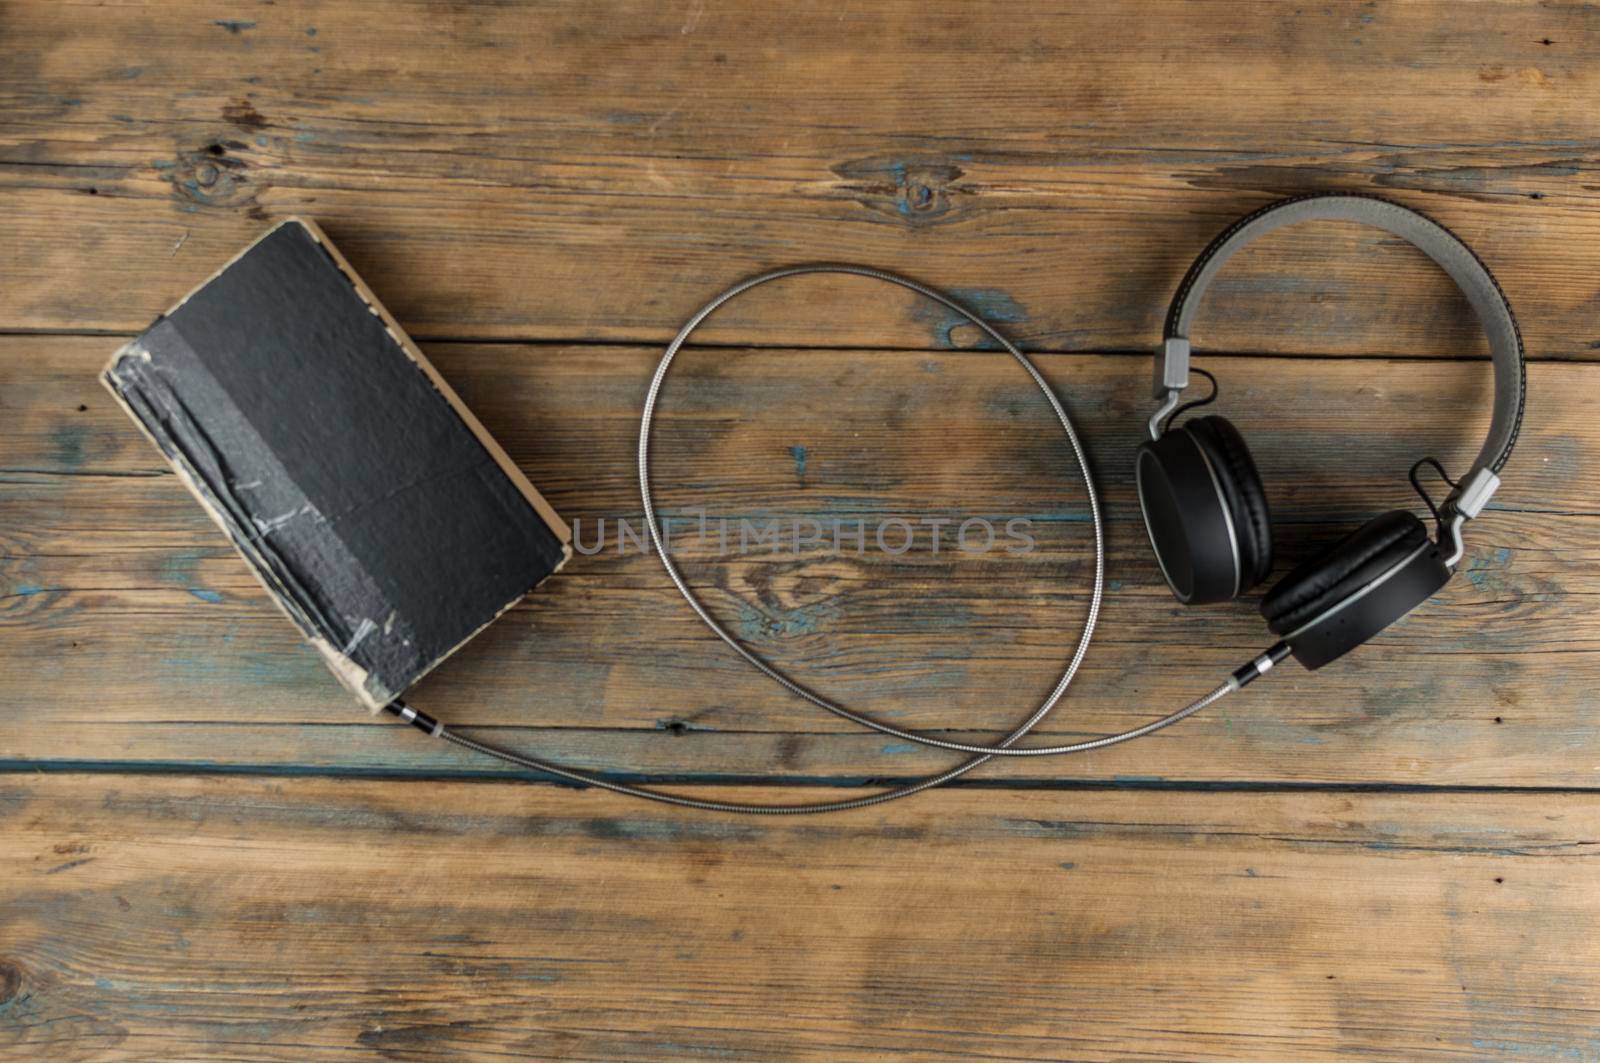 Audio book concept. Headphones and old book over wooden table. Top view with space for your text. Remote education concept.